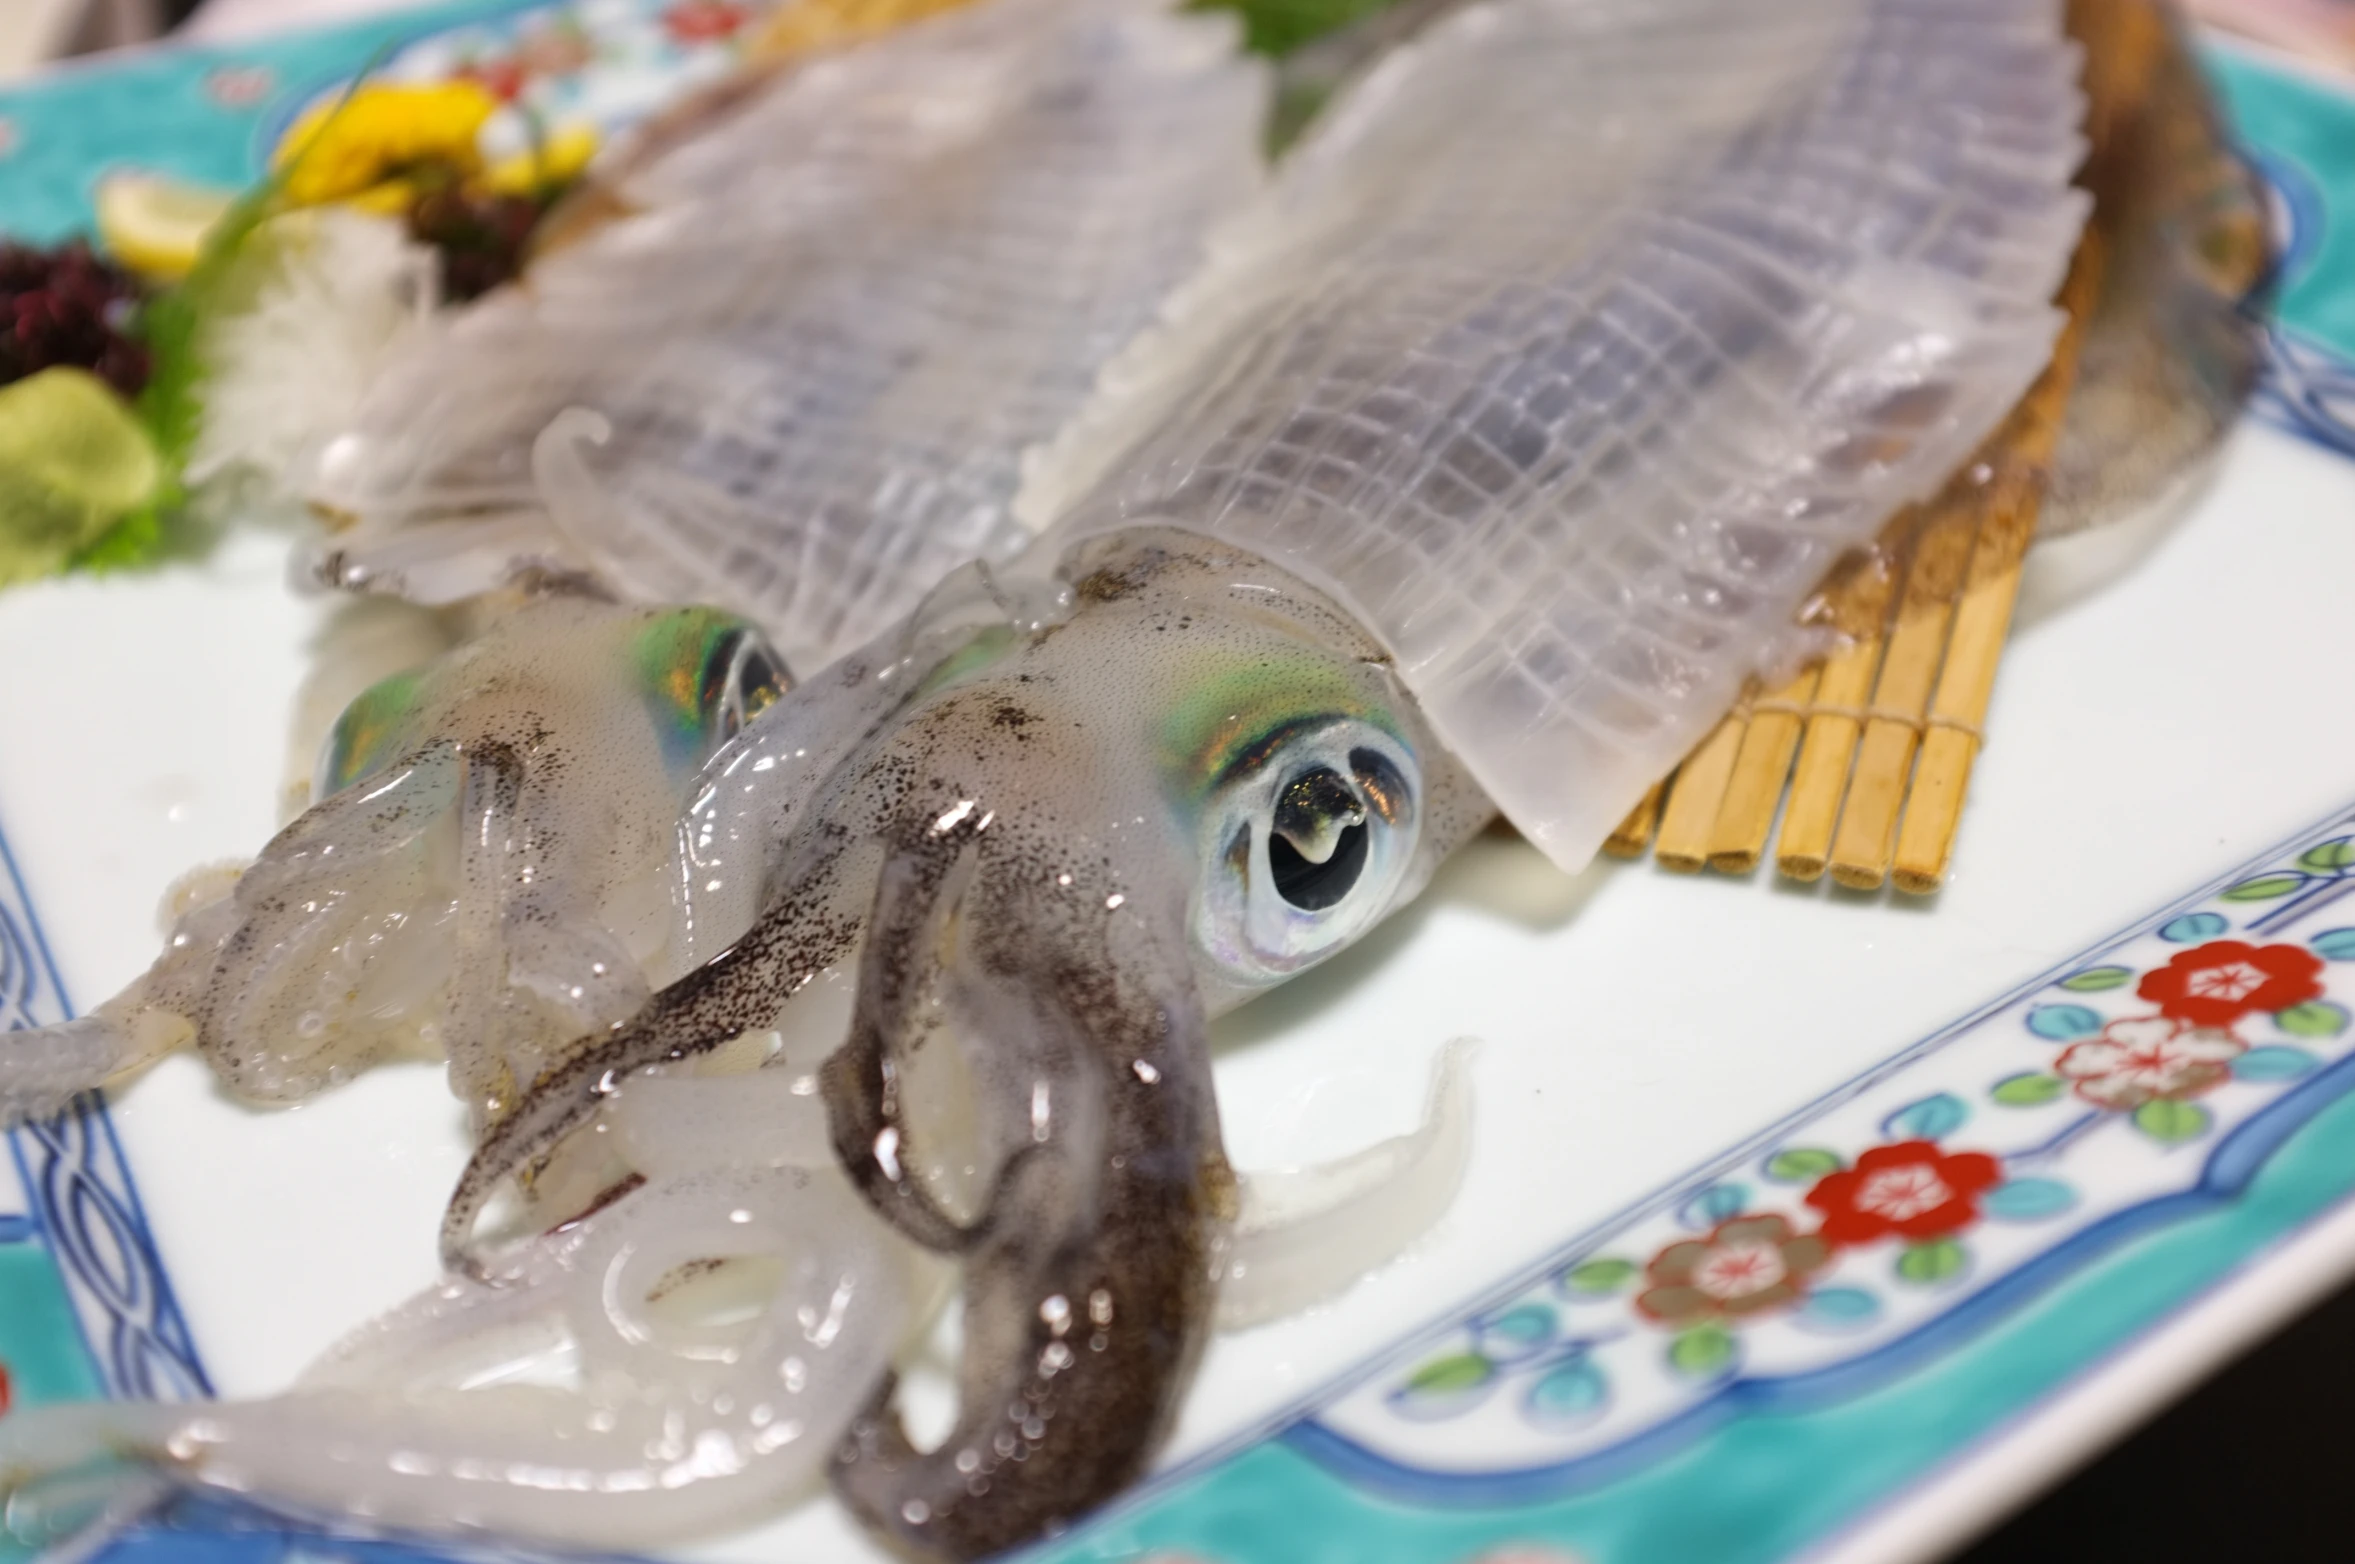 two squids with large eyes are on a plate